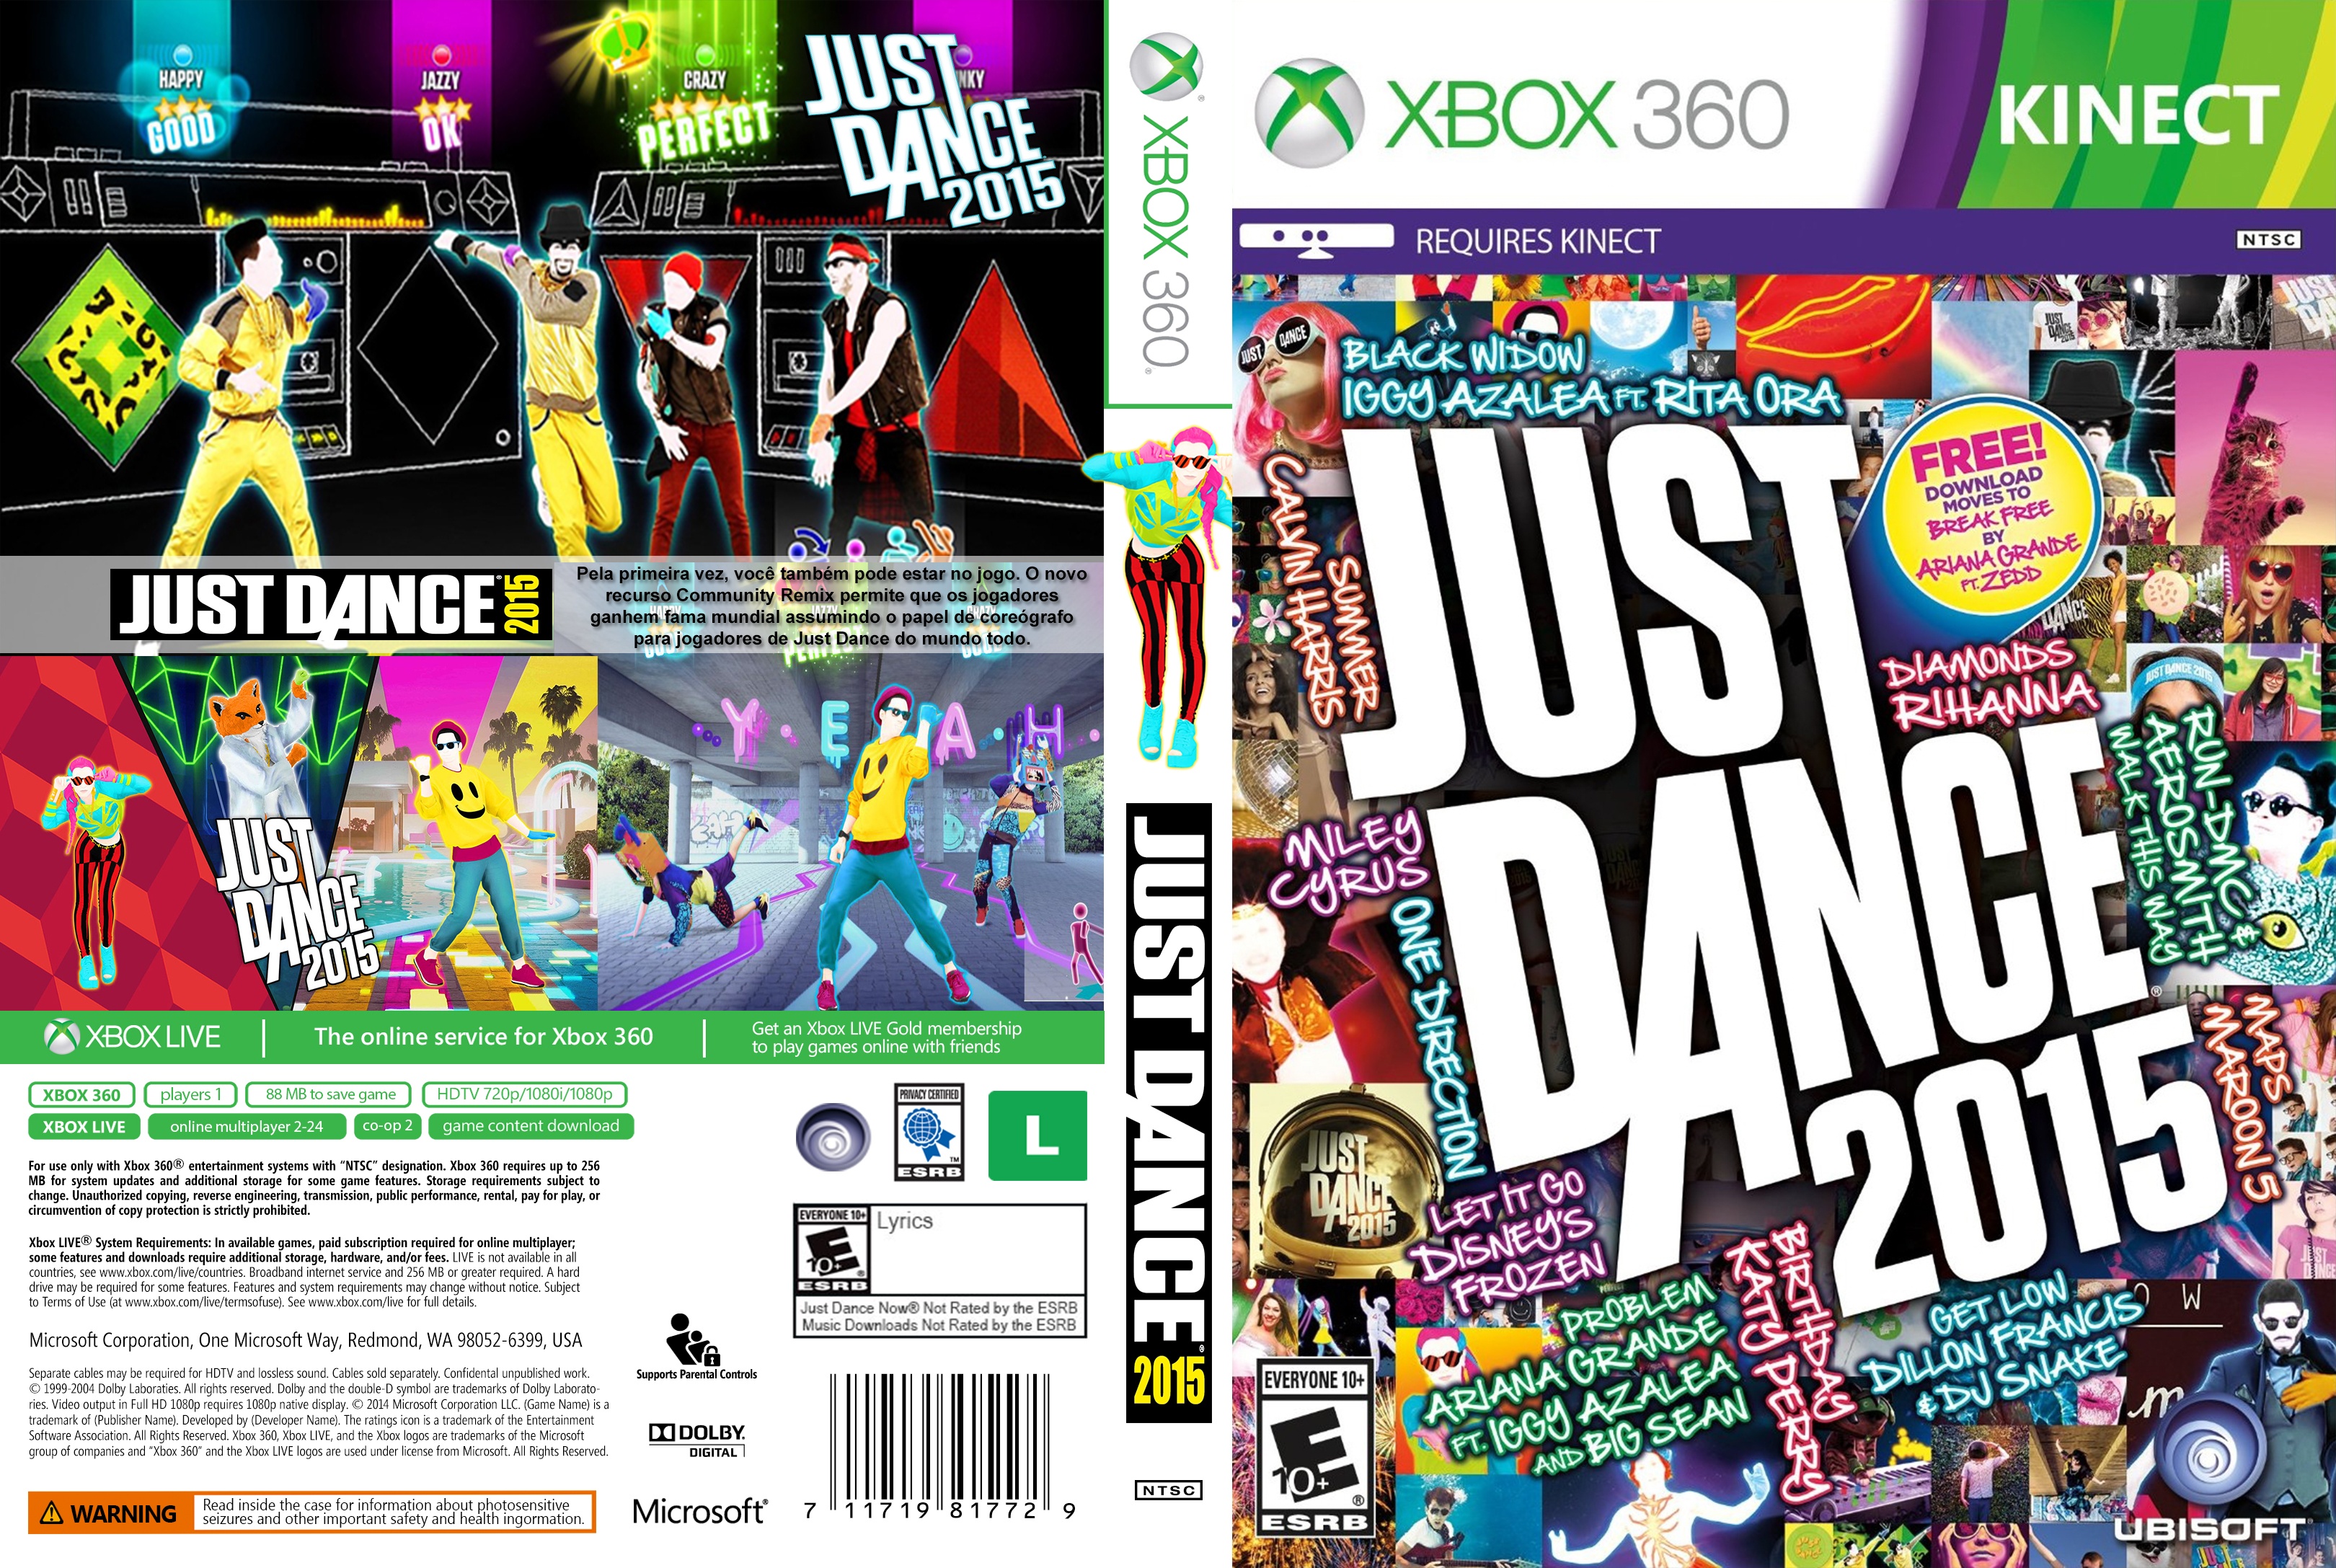 Just Dance 2015 box cover